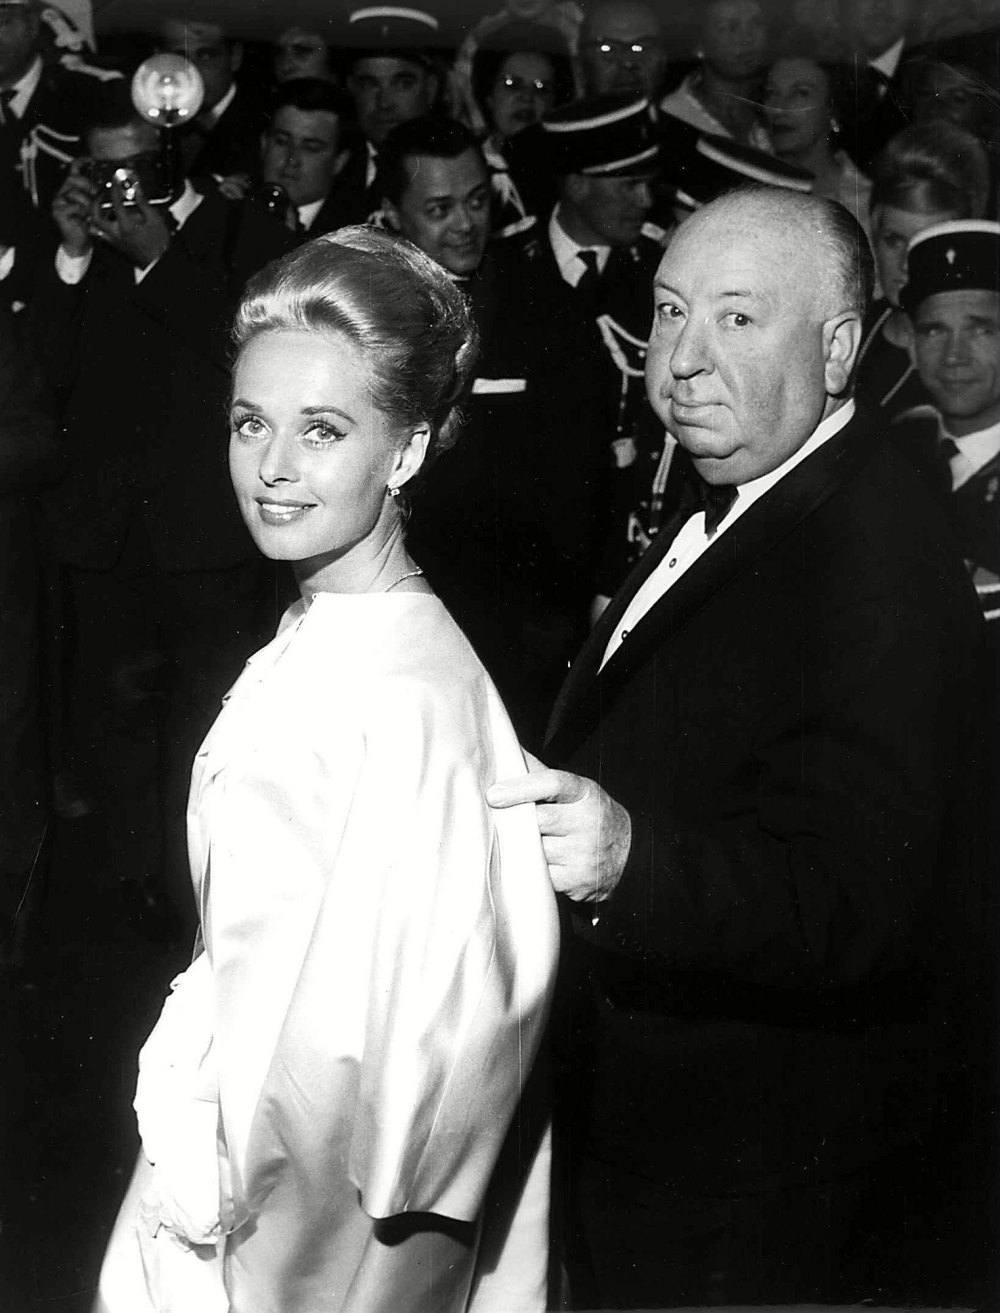 Tippi Hedren Claims Alfred Hitchcock Sexually Assaulted Her in the ’60s